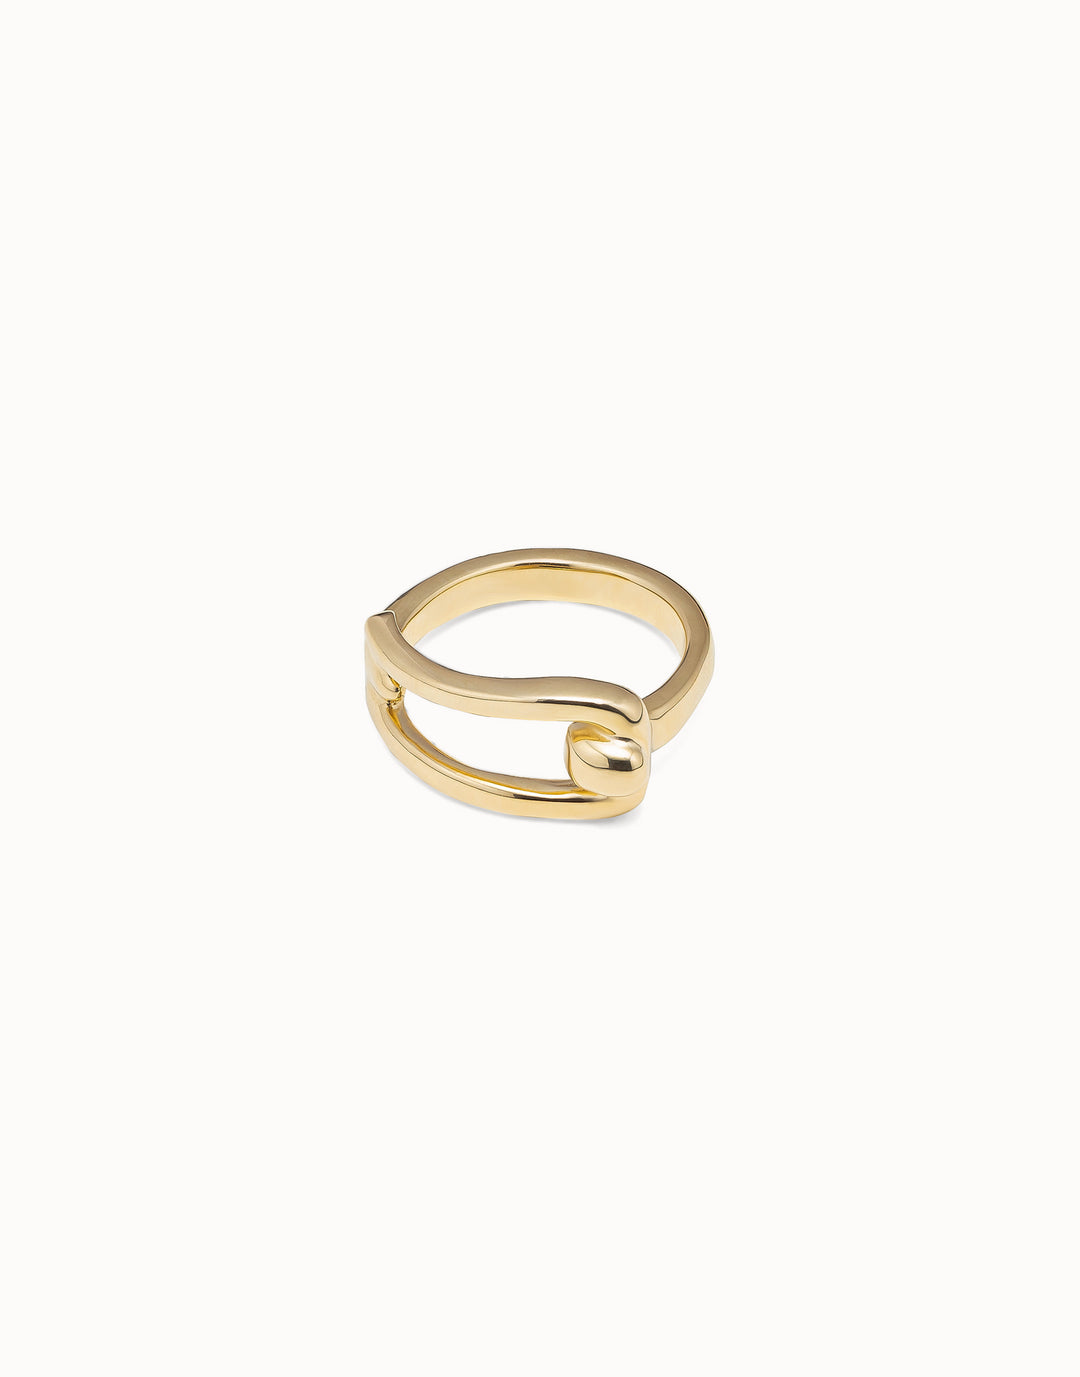 PROSPERITY RING - GOLD - Kingfisher Road - Online Boutique